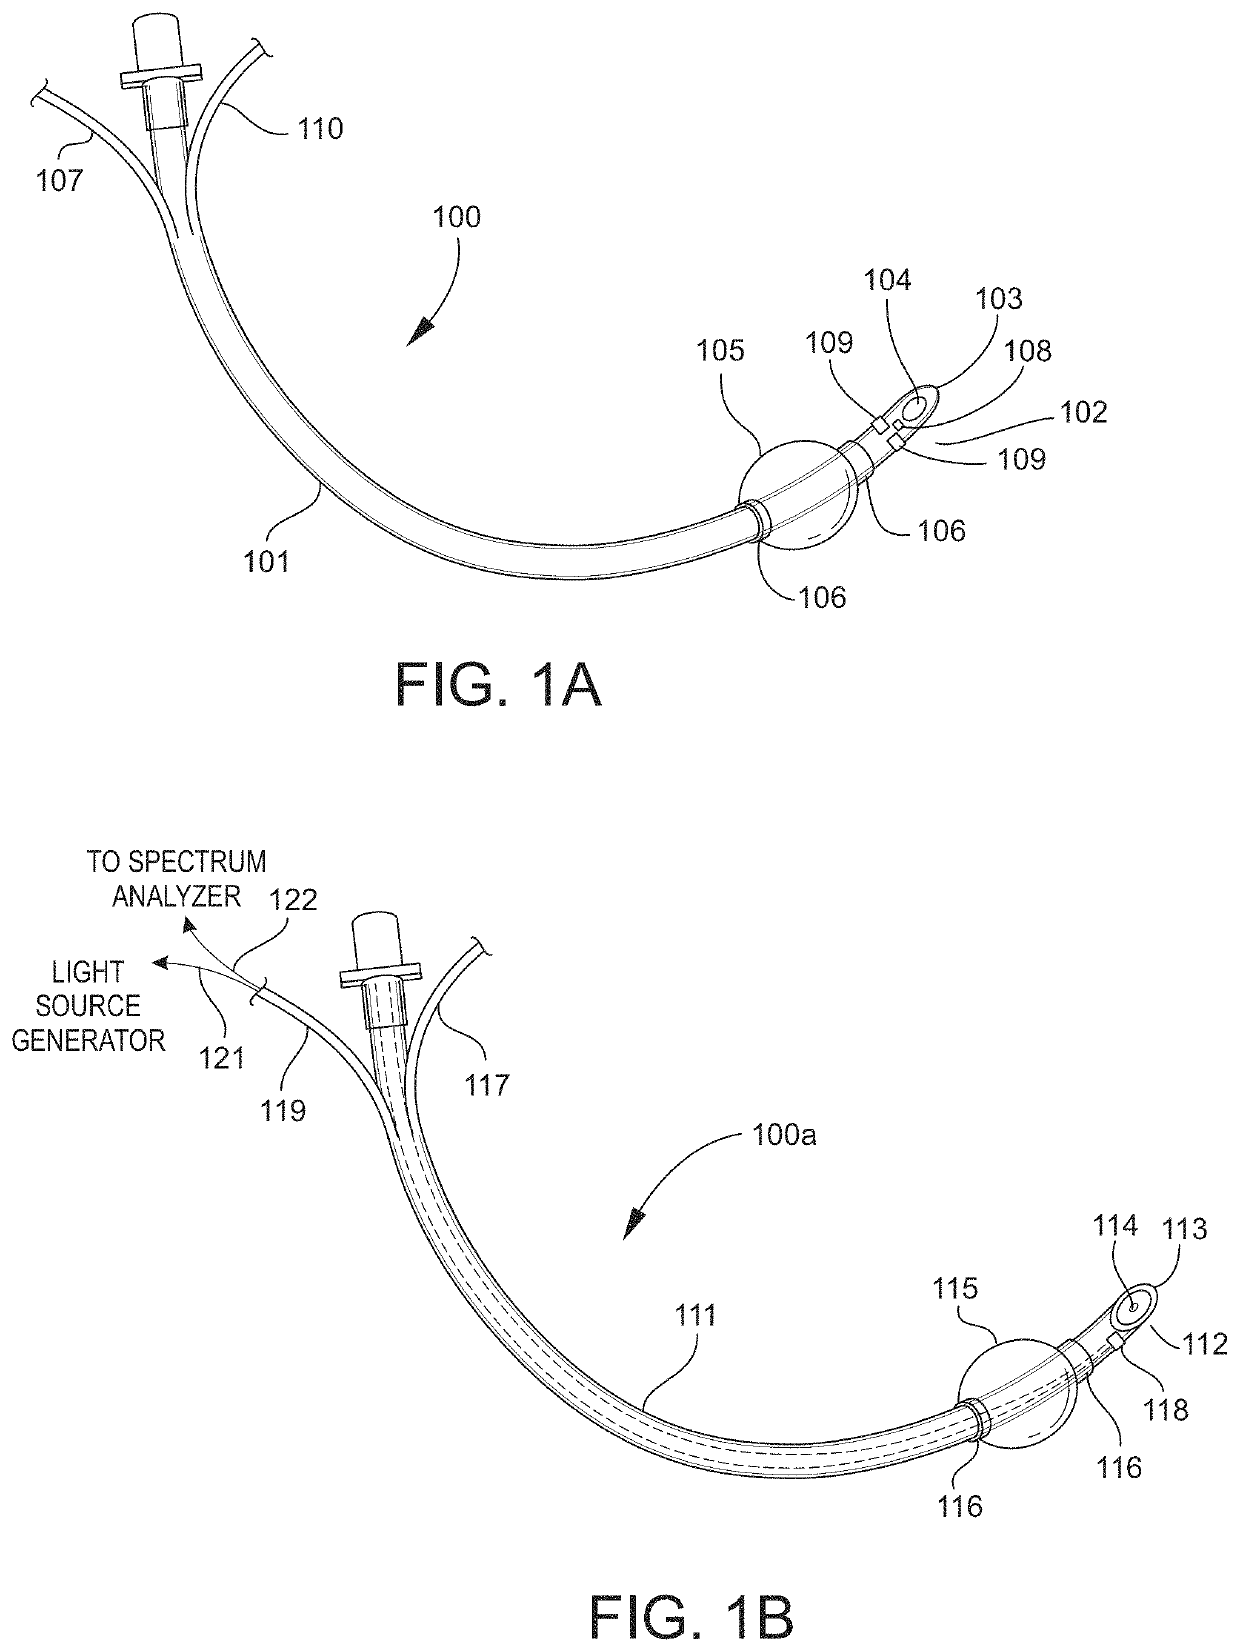 Airway management device for identification of tracheal and/or esophageal tissue